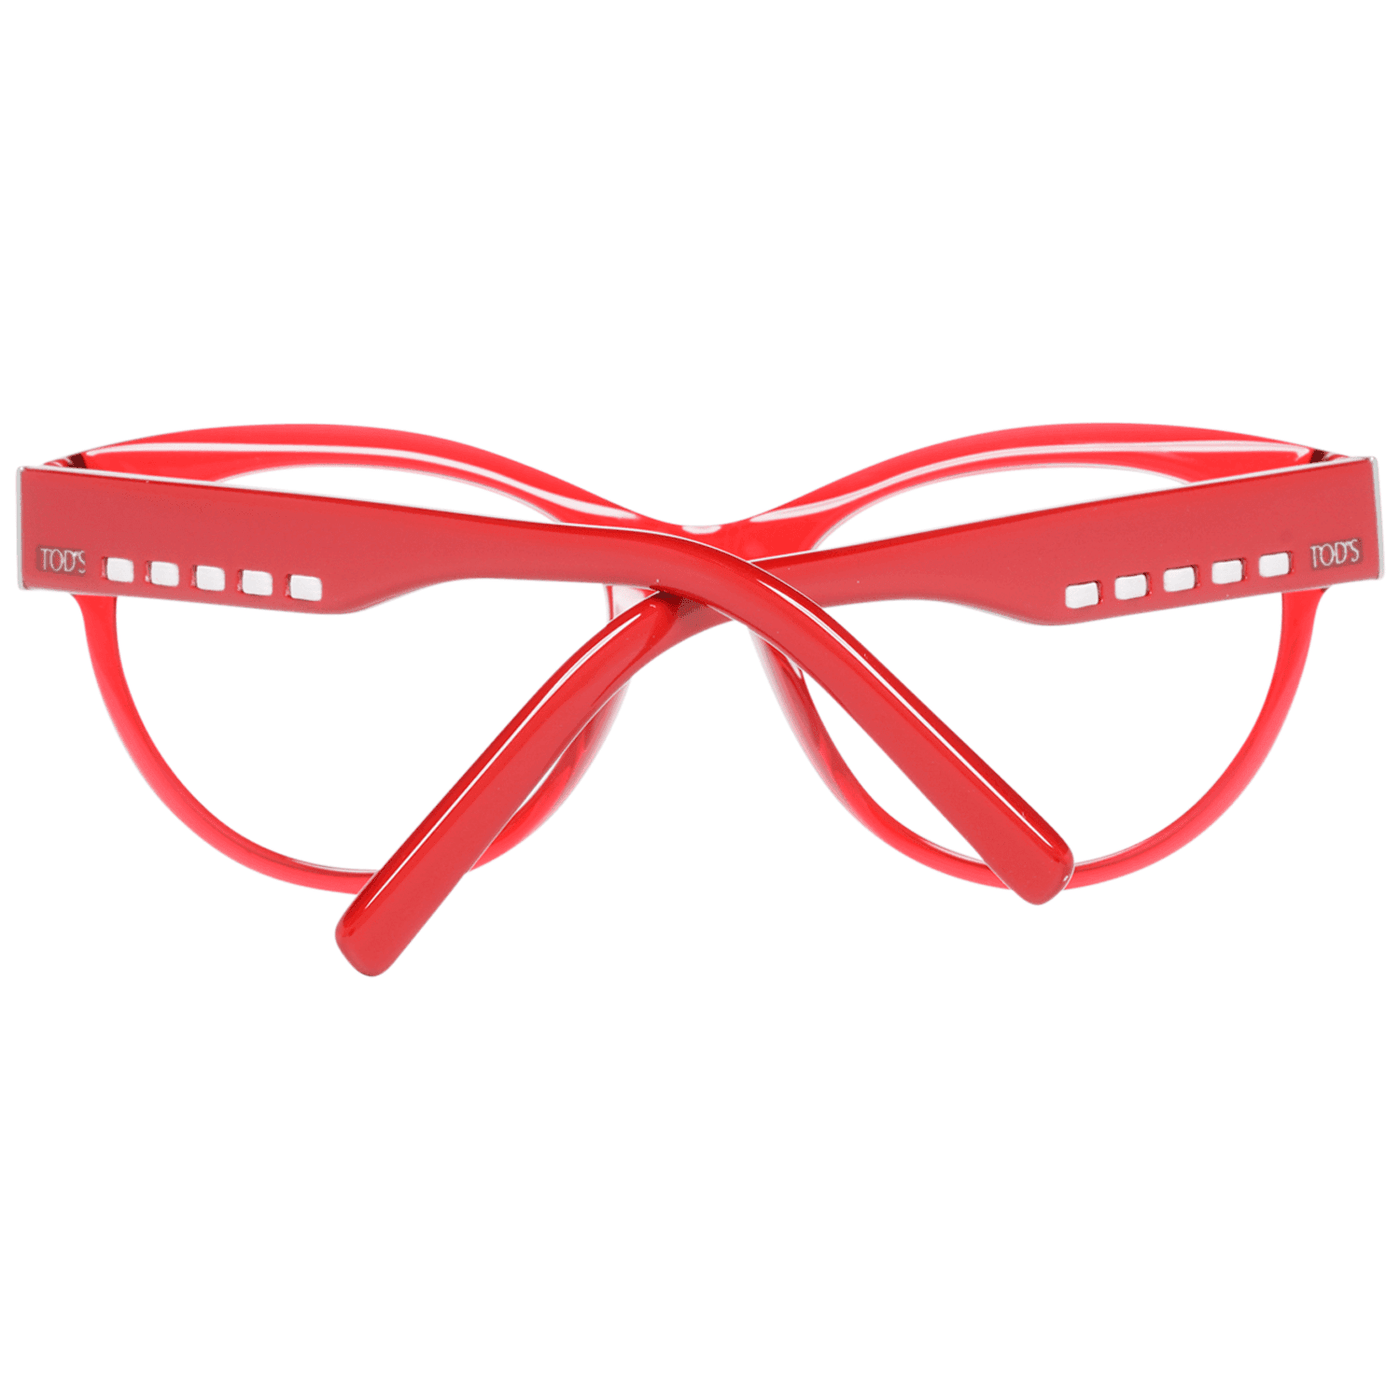 Tod's Red Women Optical Frames #women, feed-agegroup-adult, feed-color-Red, feed-gender-female, Frames for Women - Frames, Red, Tod's at SEYMAYKA